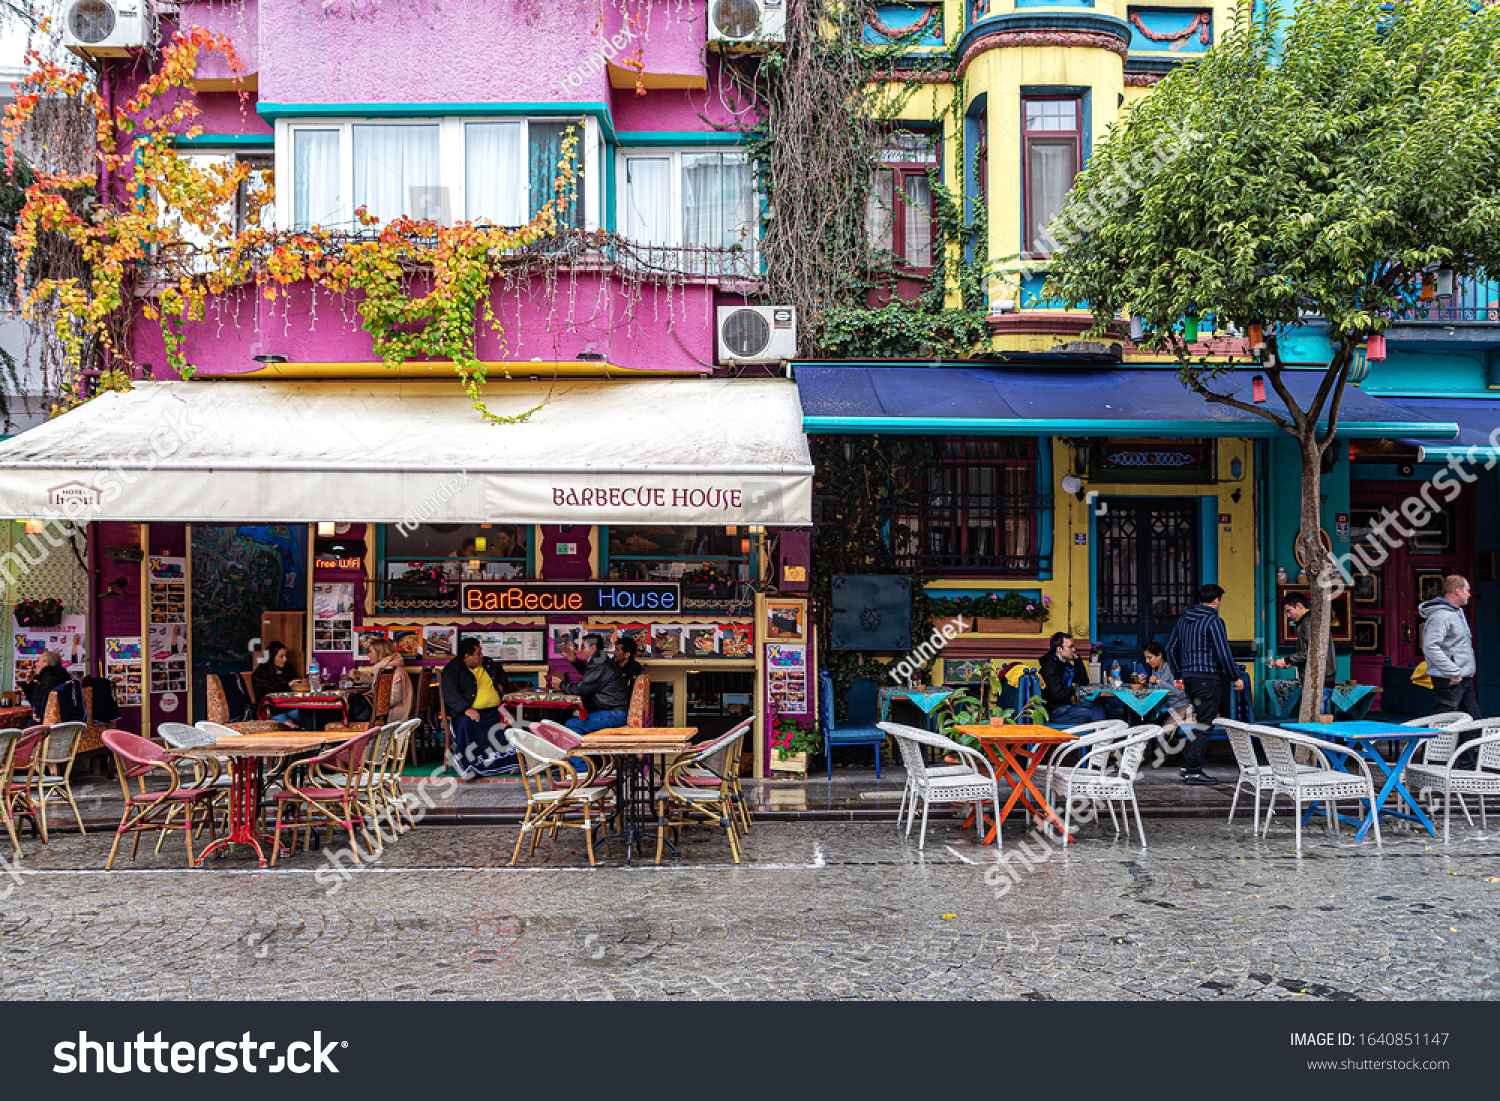 Istanbul cafe